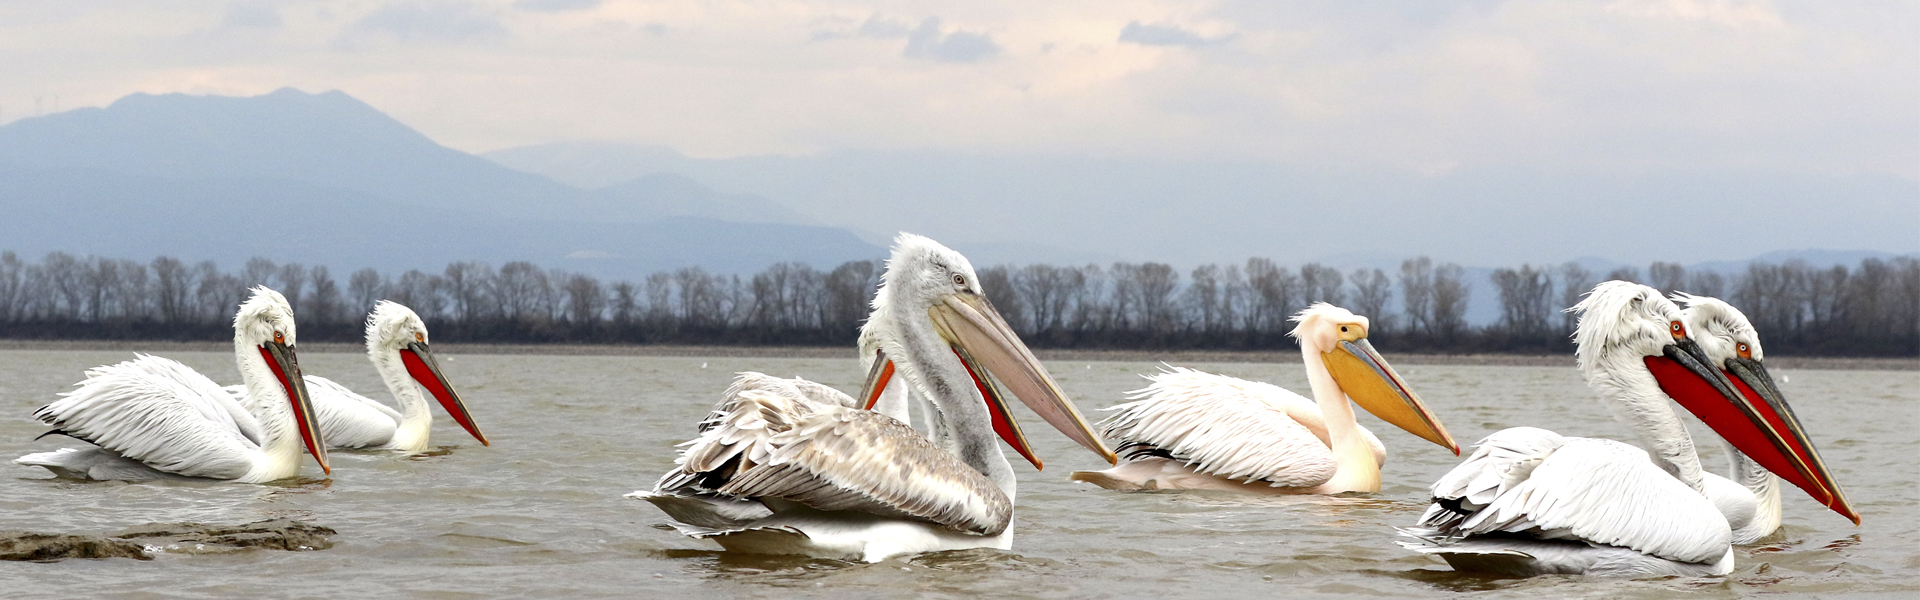 New tagging missions of Dalmatian pelicans in Western Greece